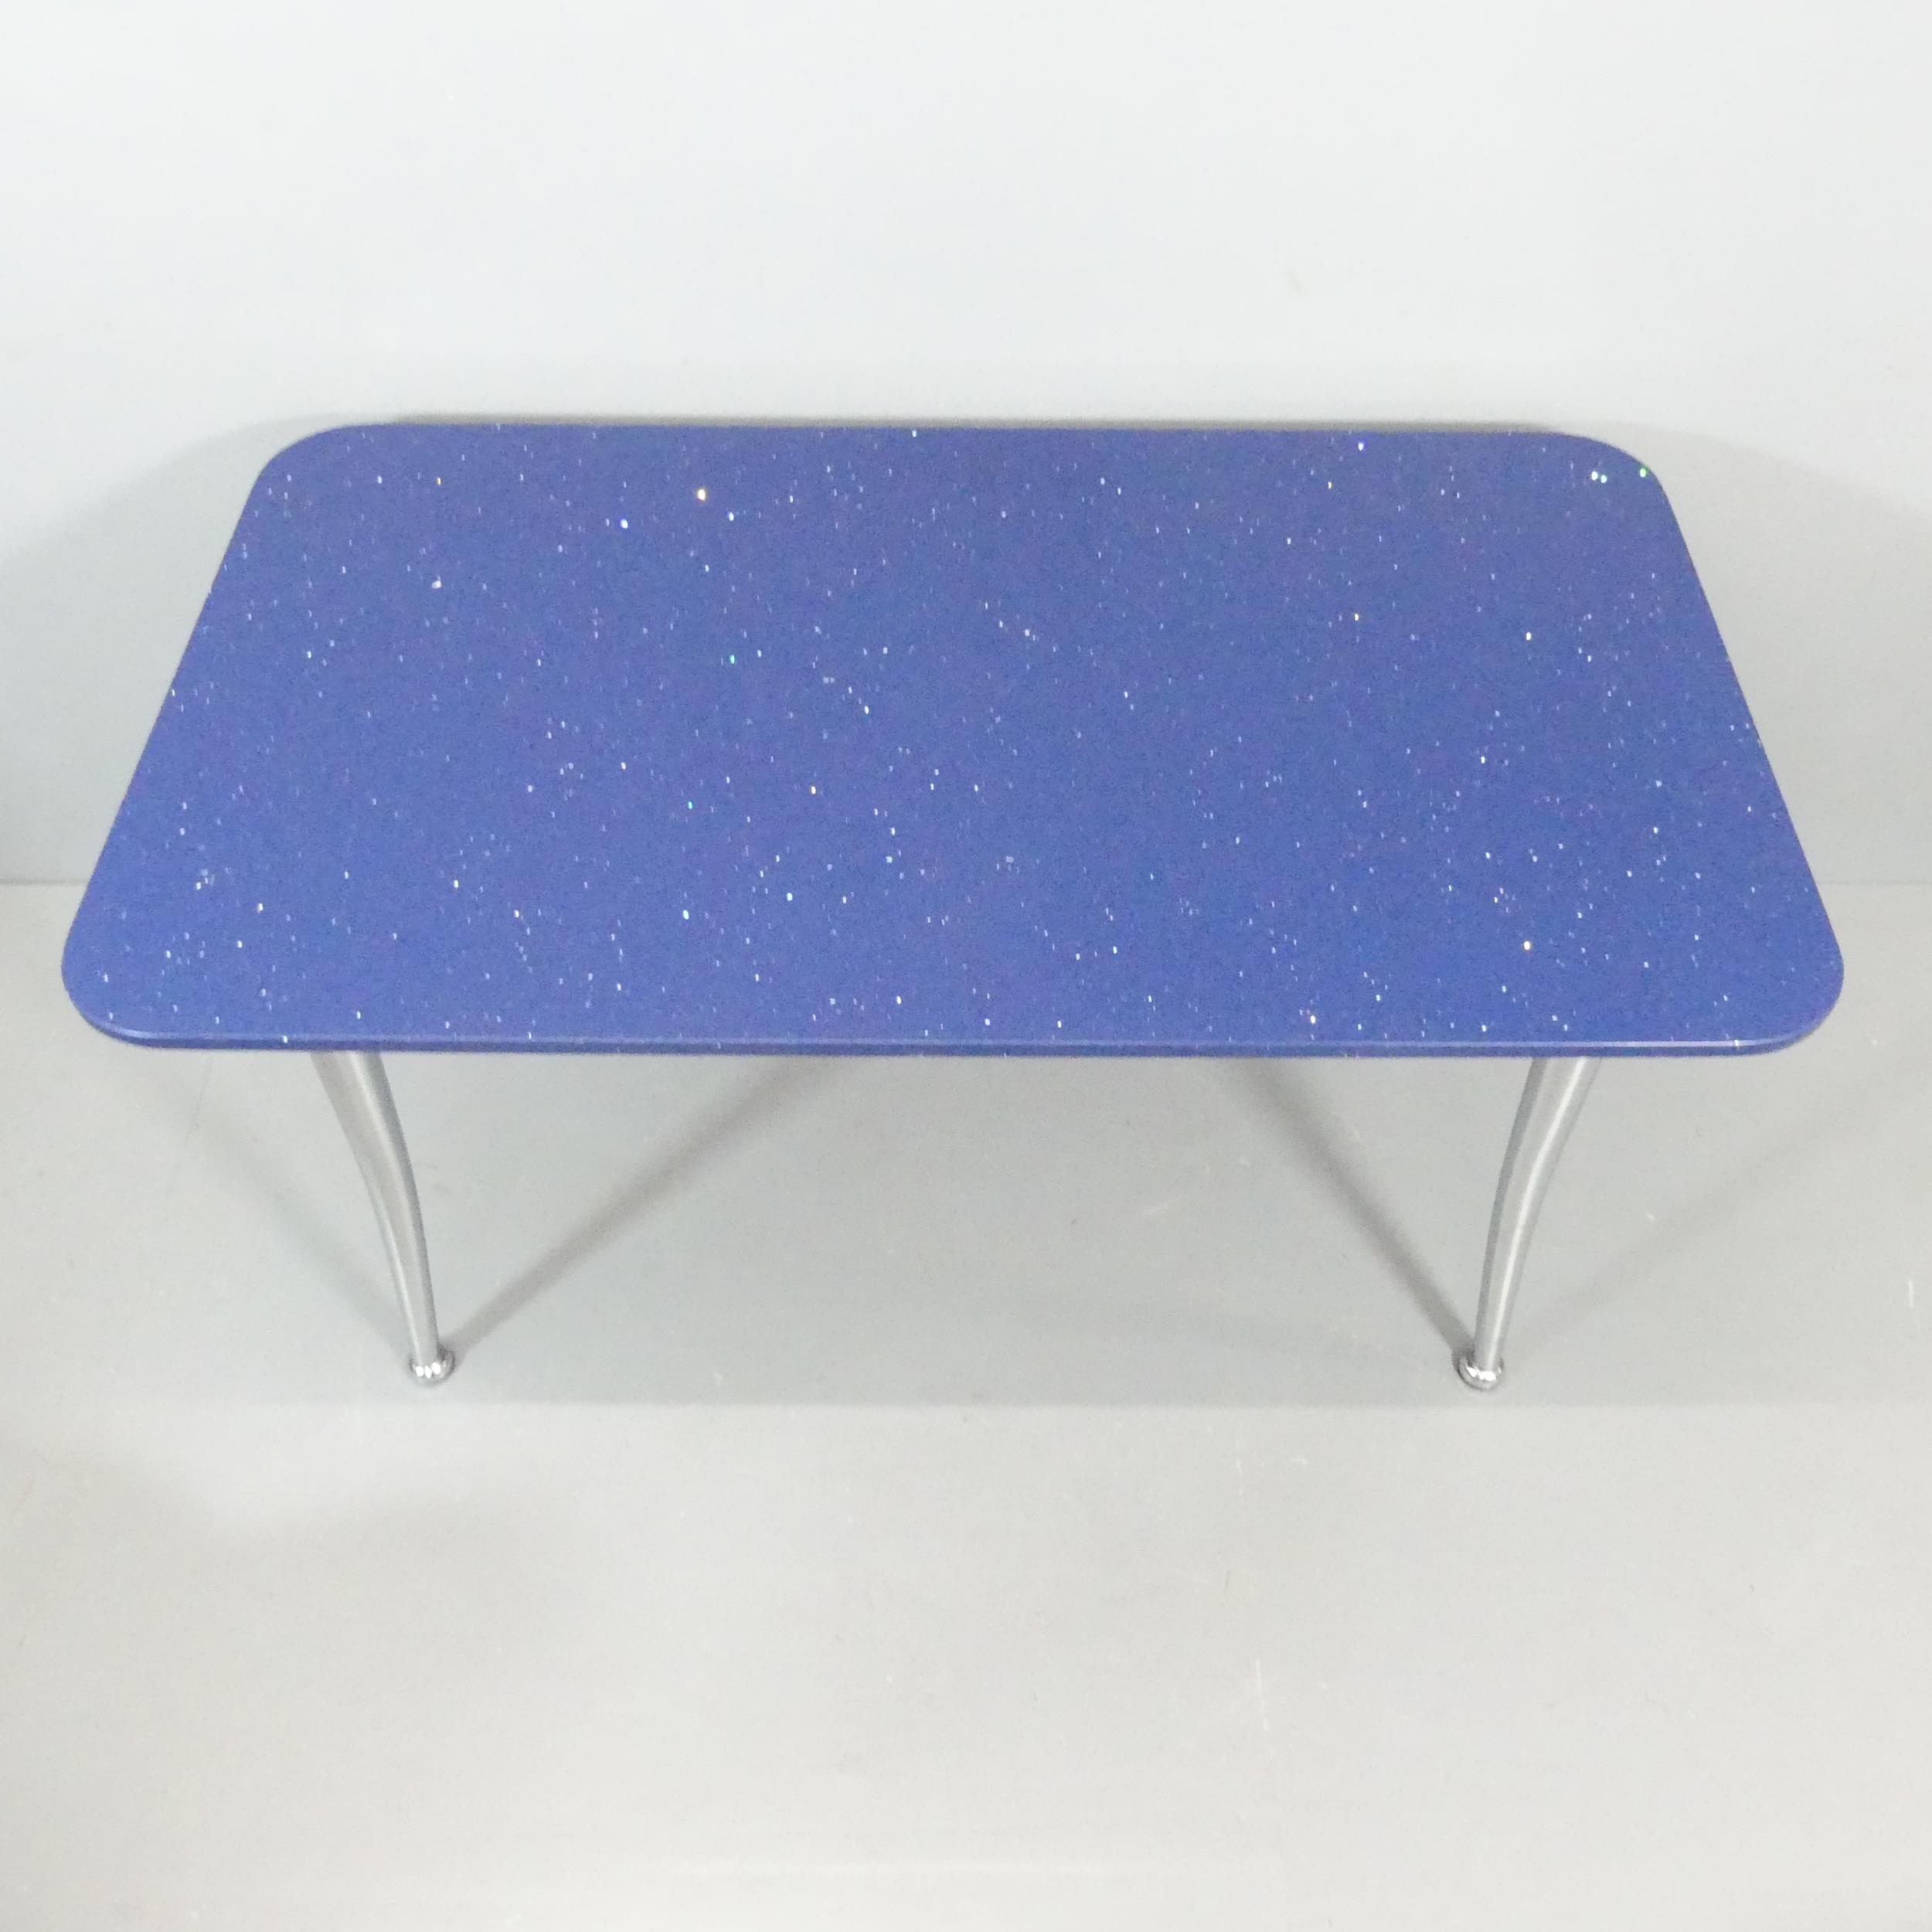 A 1980s dining table with sparkle blue quartz stone top on chrome swept out legs. 140x75x80cm. - Image 2 of 2